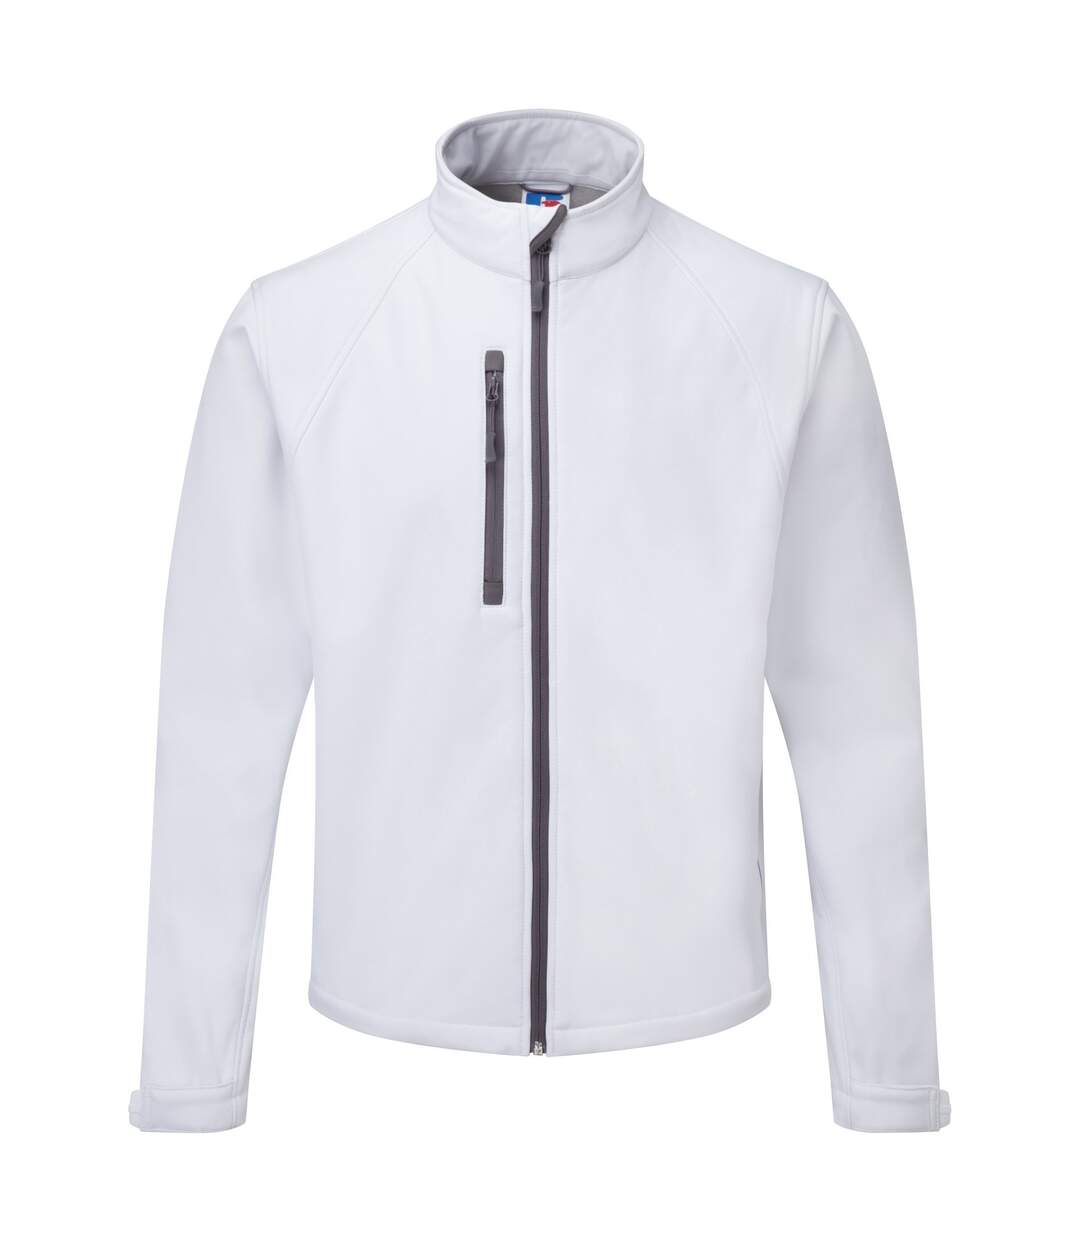 Jerzees Colors Mens Water Resistant & Windproof Softshell Jacket (White) - UTBC562